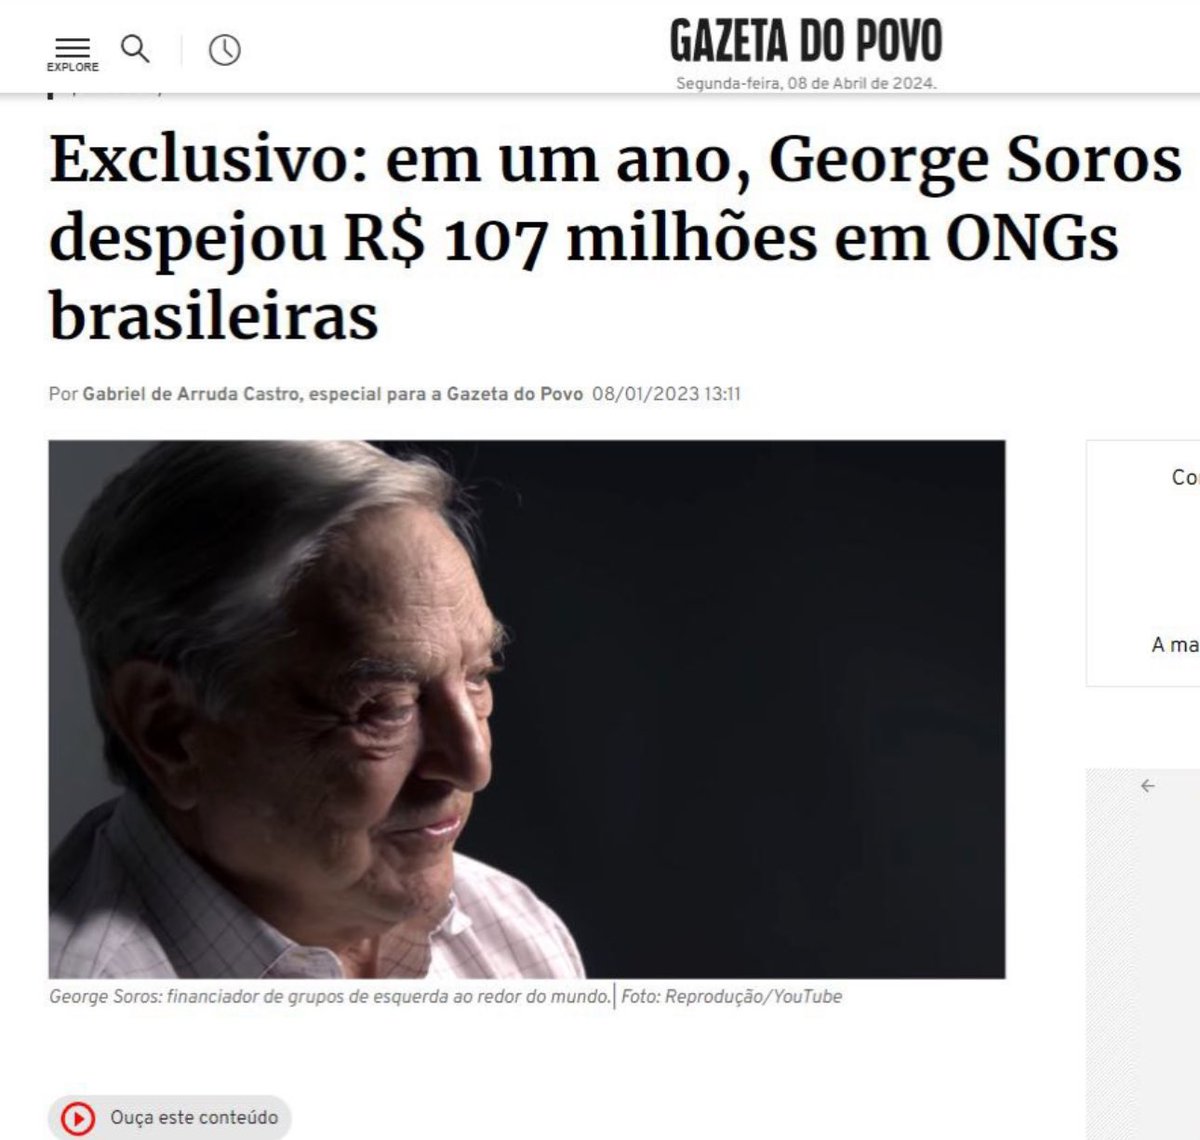 🇬🇧George Soros has already invested hundreds of millions in more than 300 NGOs operating in Brazil, to promote gender ideology, abortion, drug liberation, censorship and mass decarceration. 
And some still believe that it’s all for ‘the greater good’. 😏
——-
🇧🇷E ainda tem gente